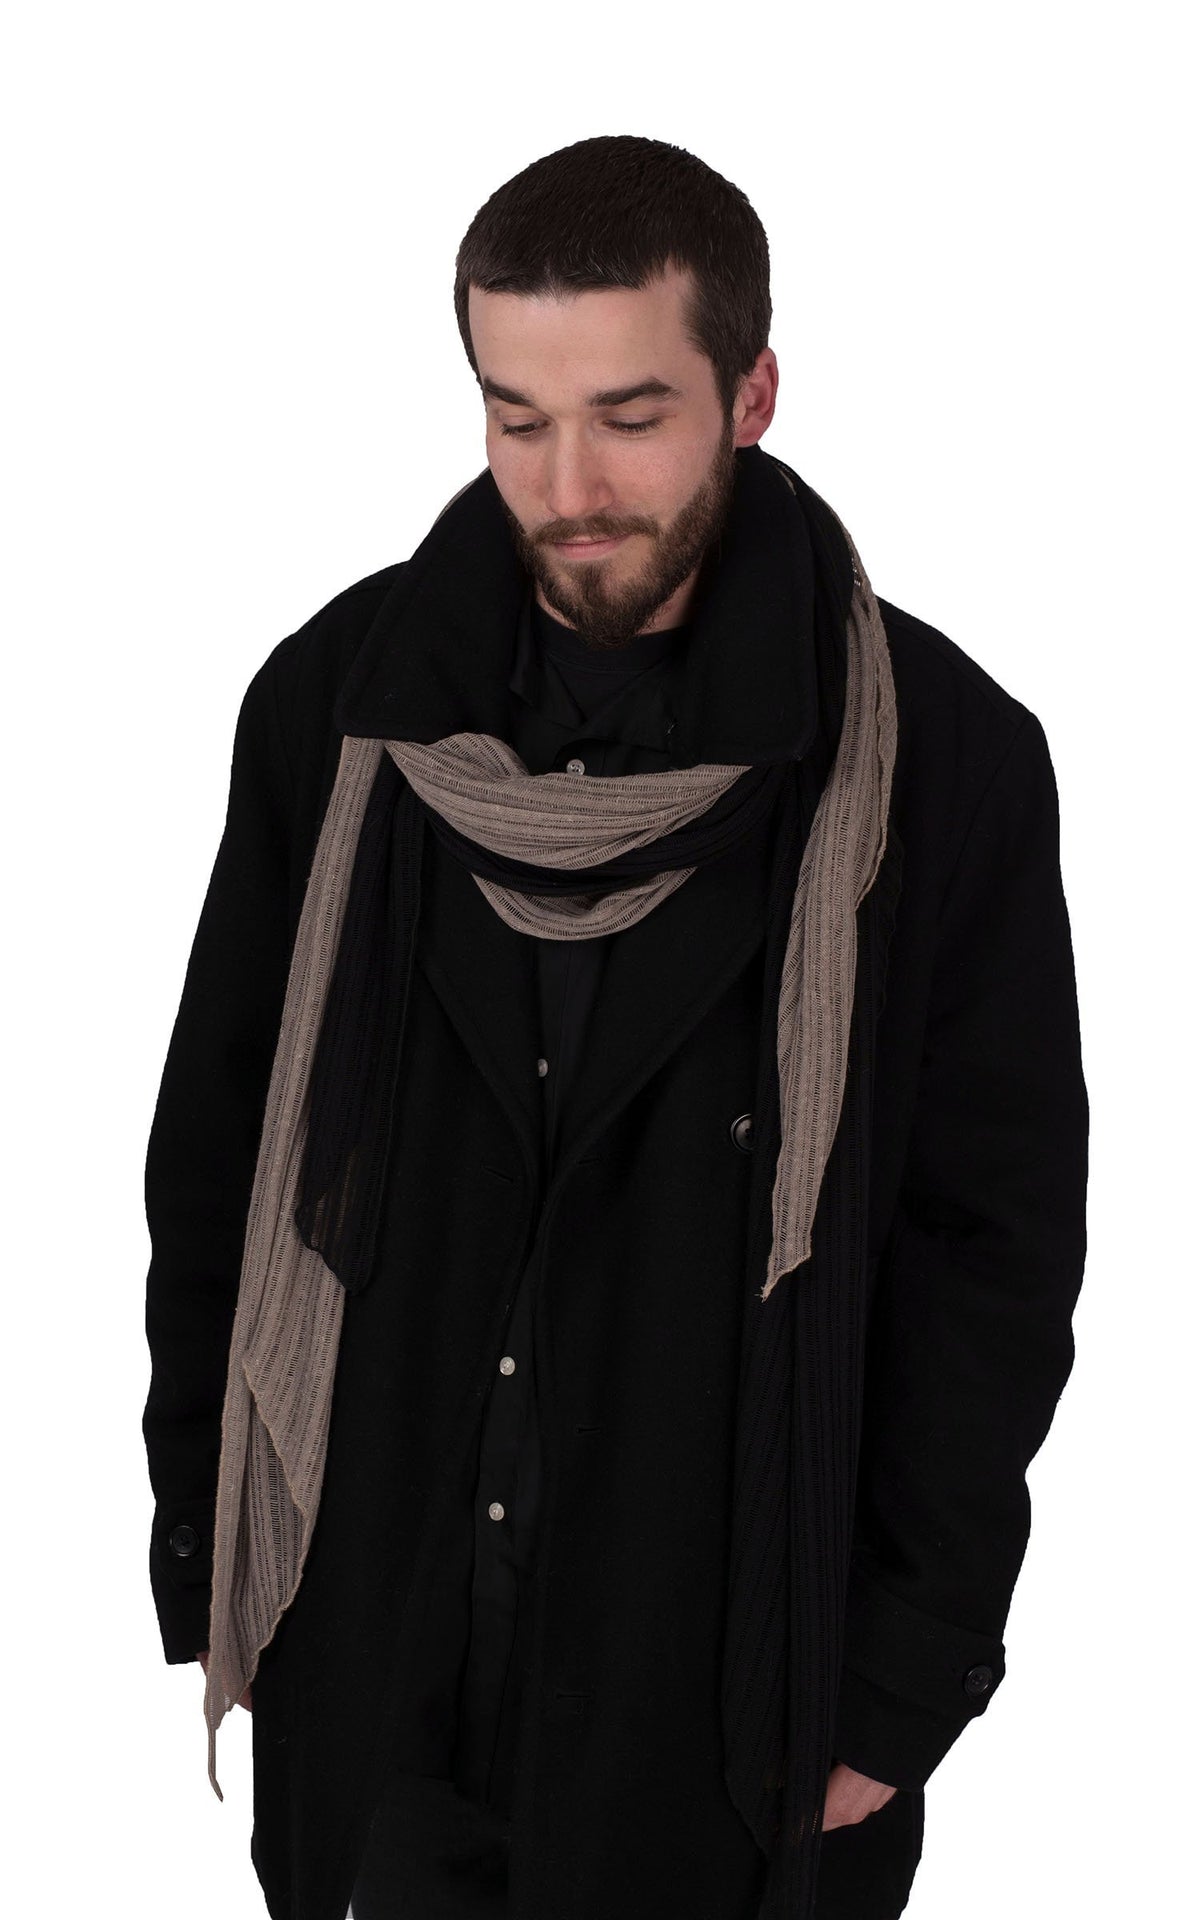 Man in peacoat looking down  wearing Two-Tone Handkerchief Scarf | Cotton Voile, Black with Earth ( Taupe, Brown))  | Handmade in Seattle WA | Pandemonium Millinery